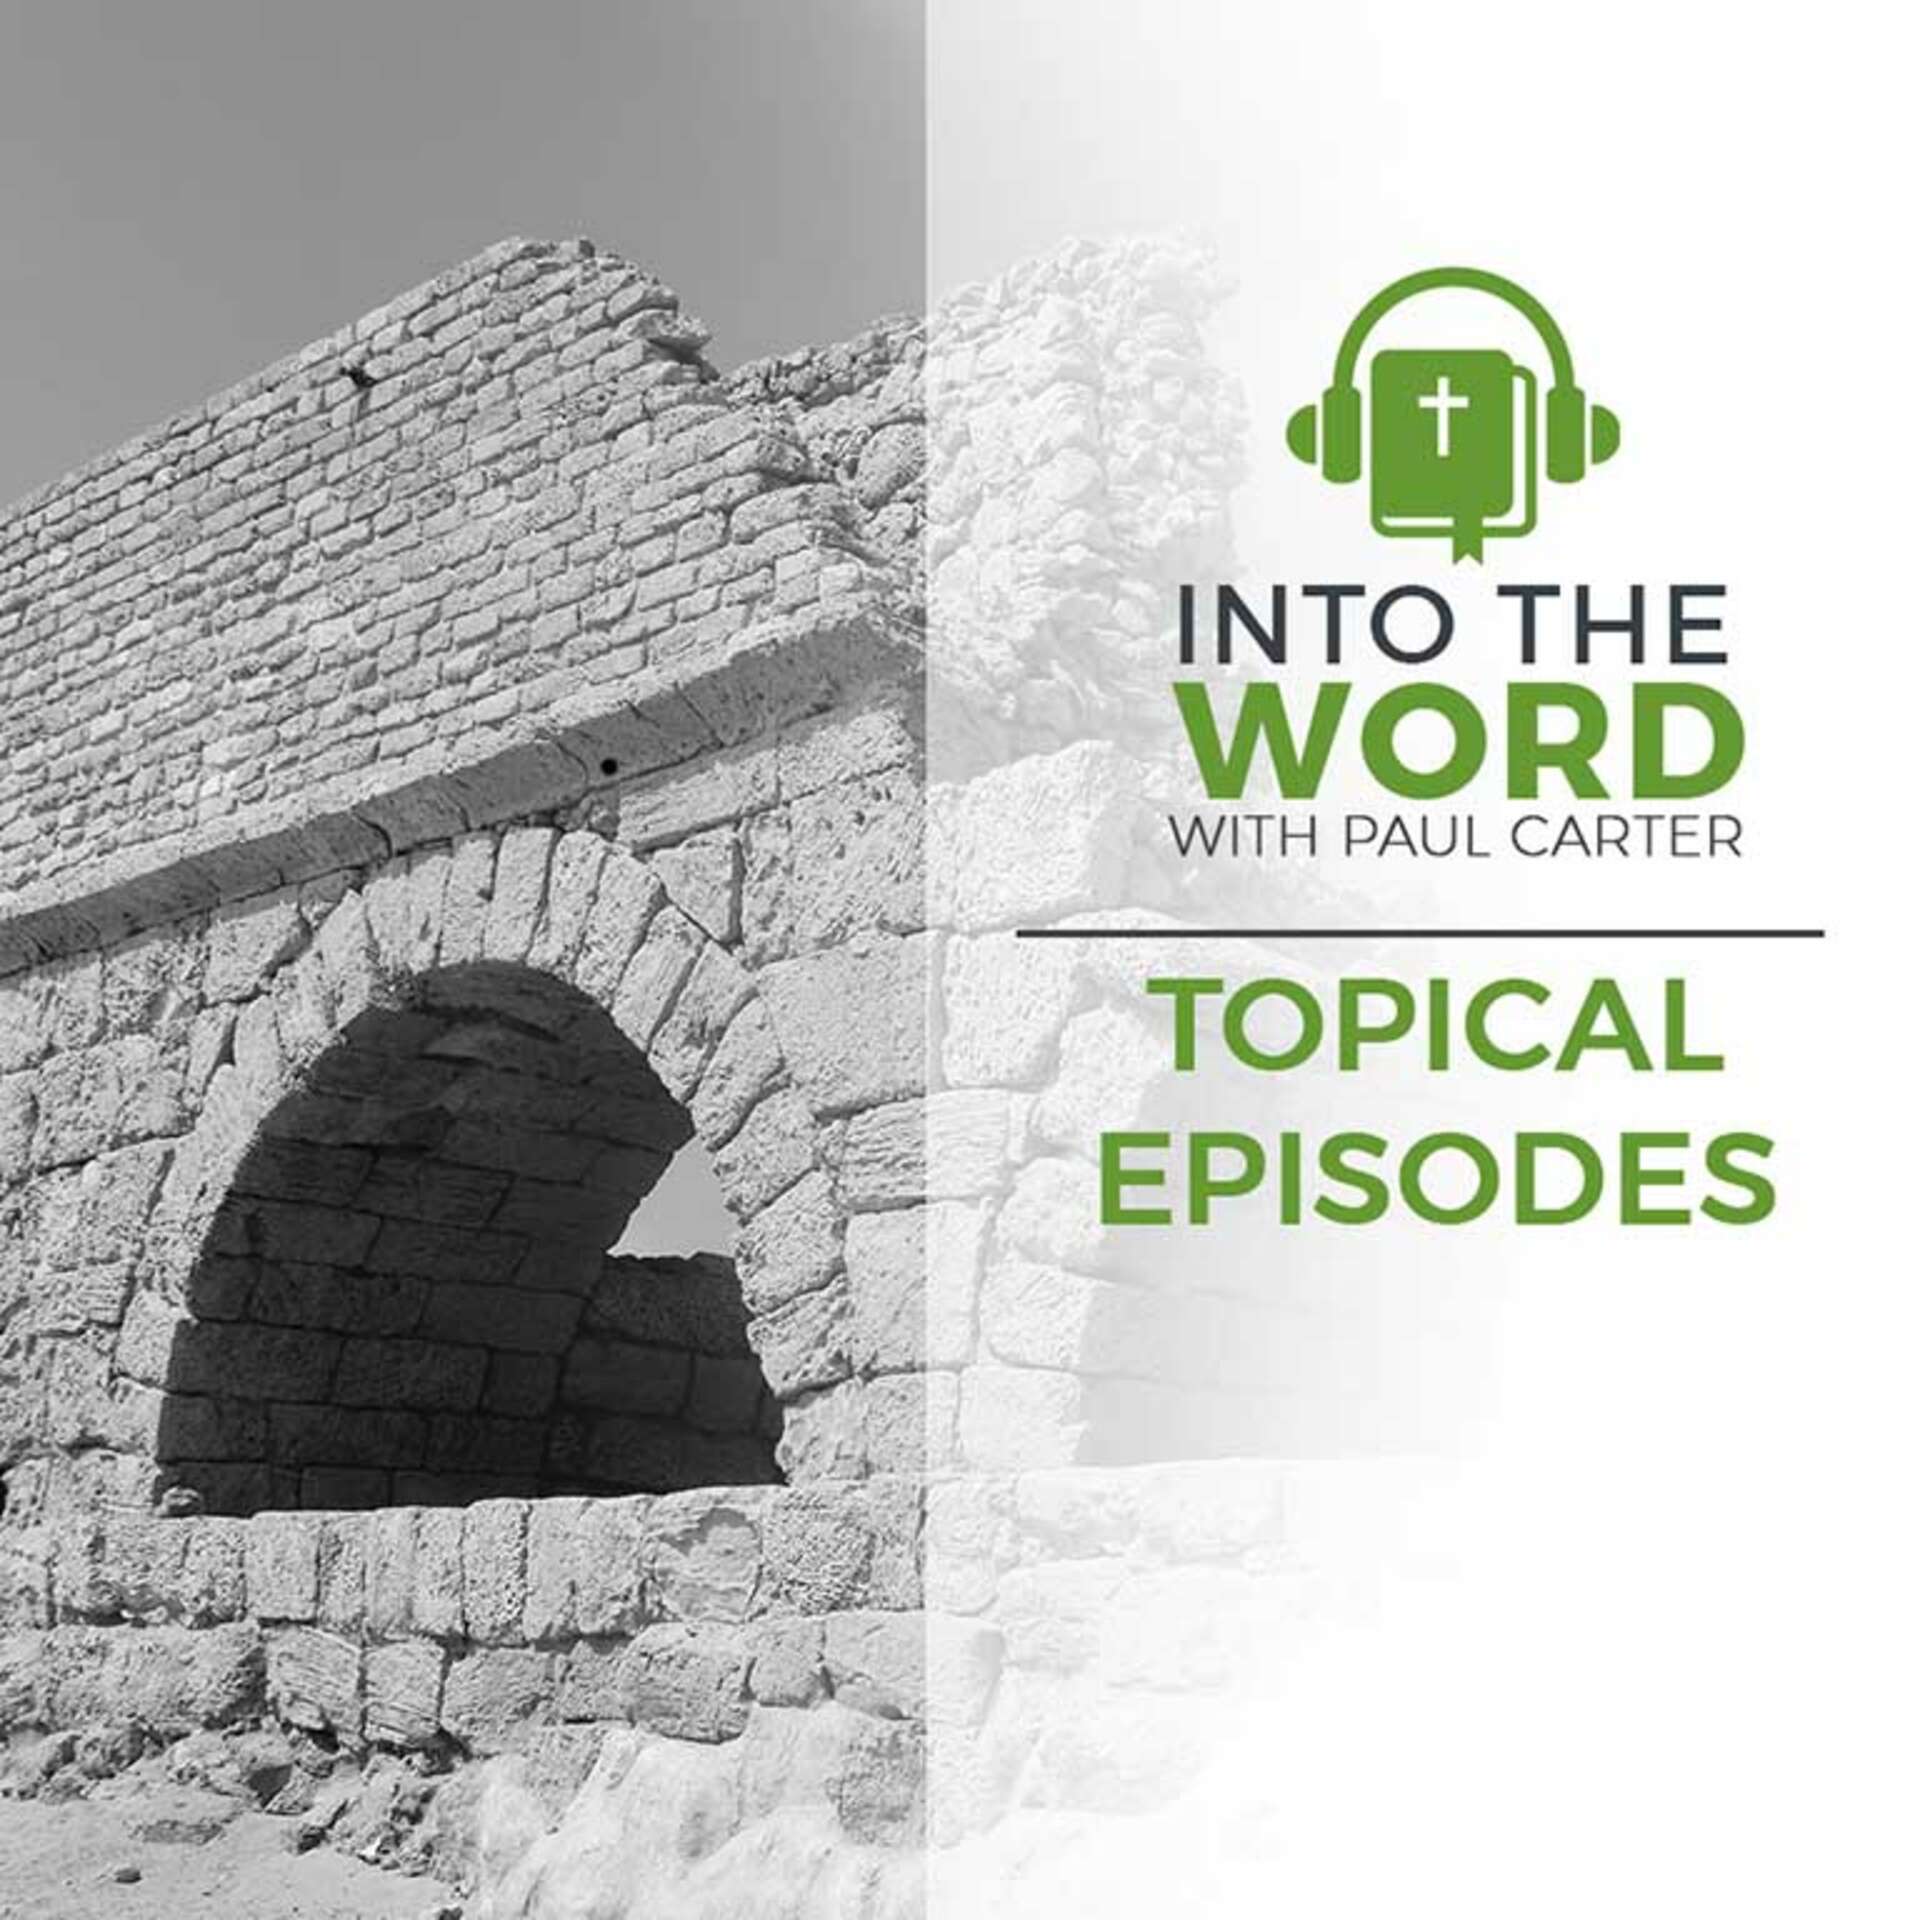 Into the Word with Paul Carter Topical Episodes